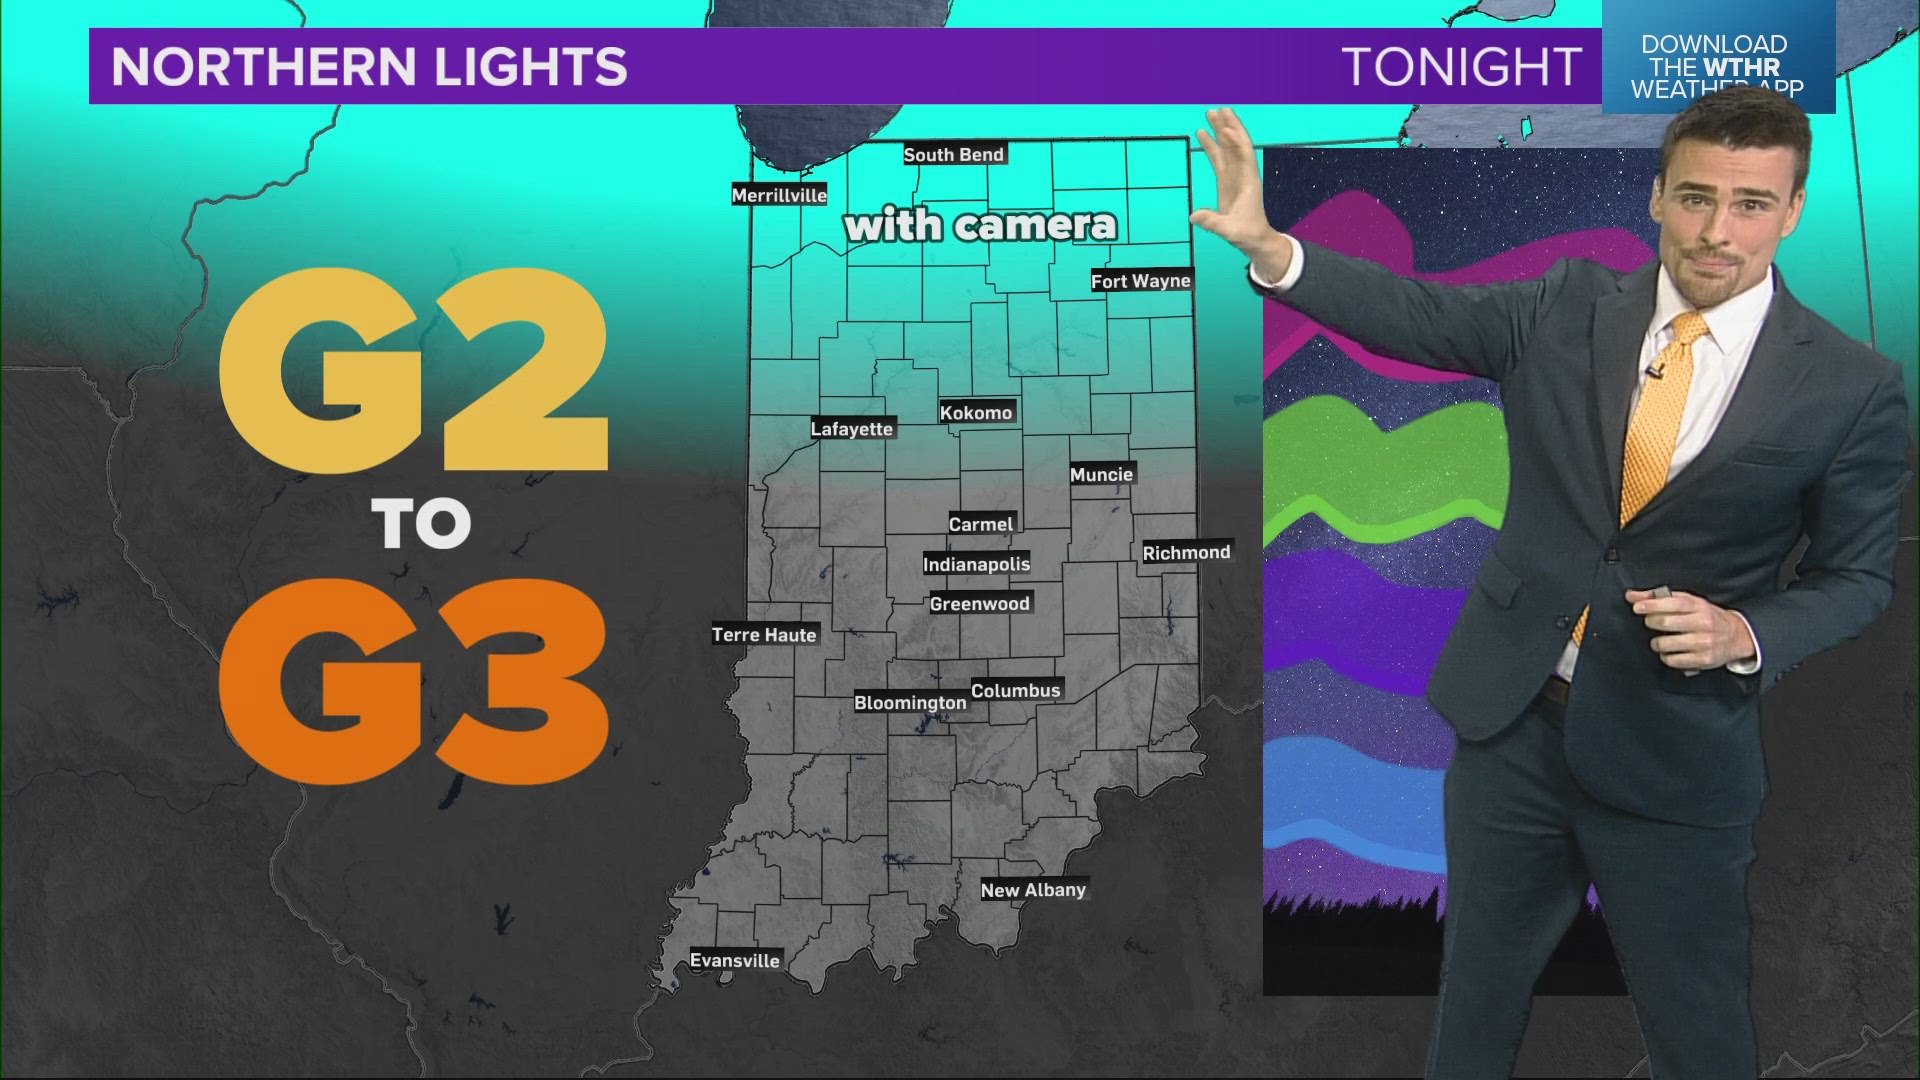 We are tracking a weaker solar storm tonight. However a quick spike could increase visibility across Indiana.